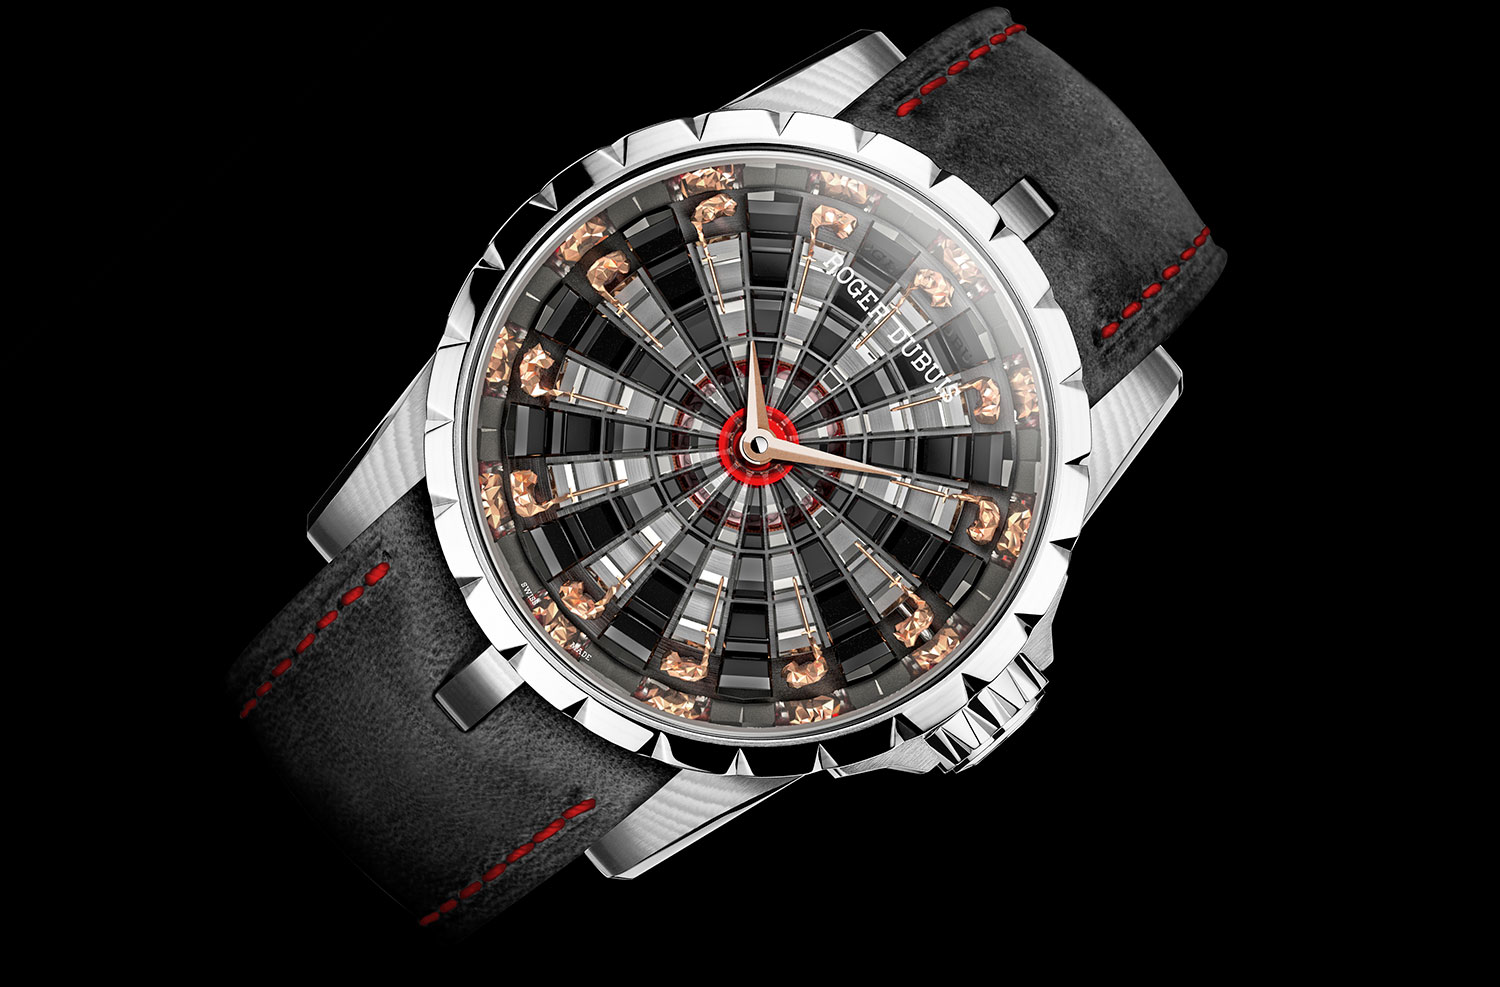 Roger Dubuis Excalibur Knights of The Round Table